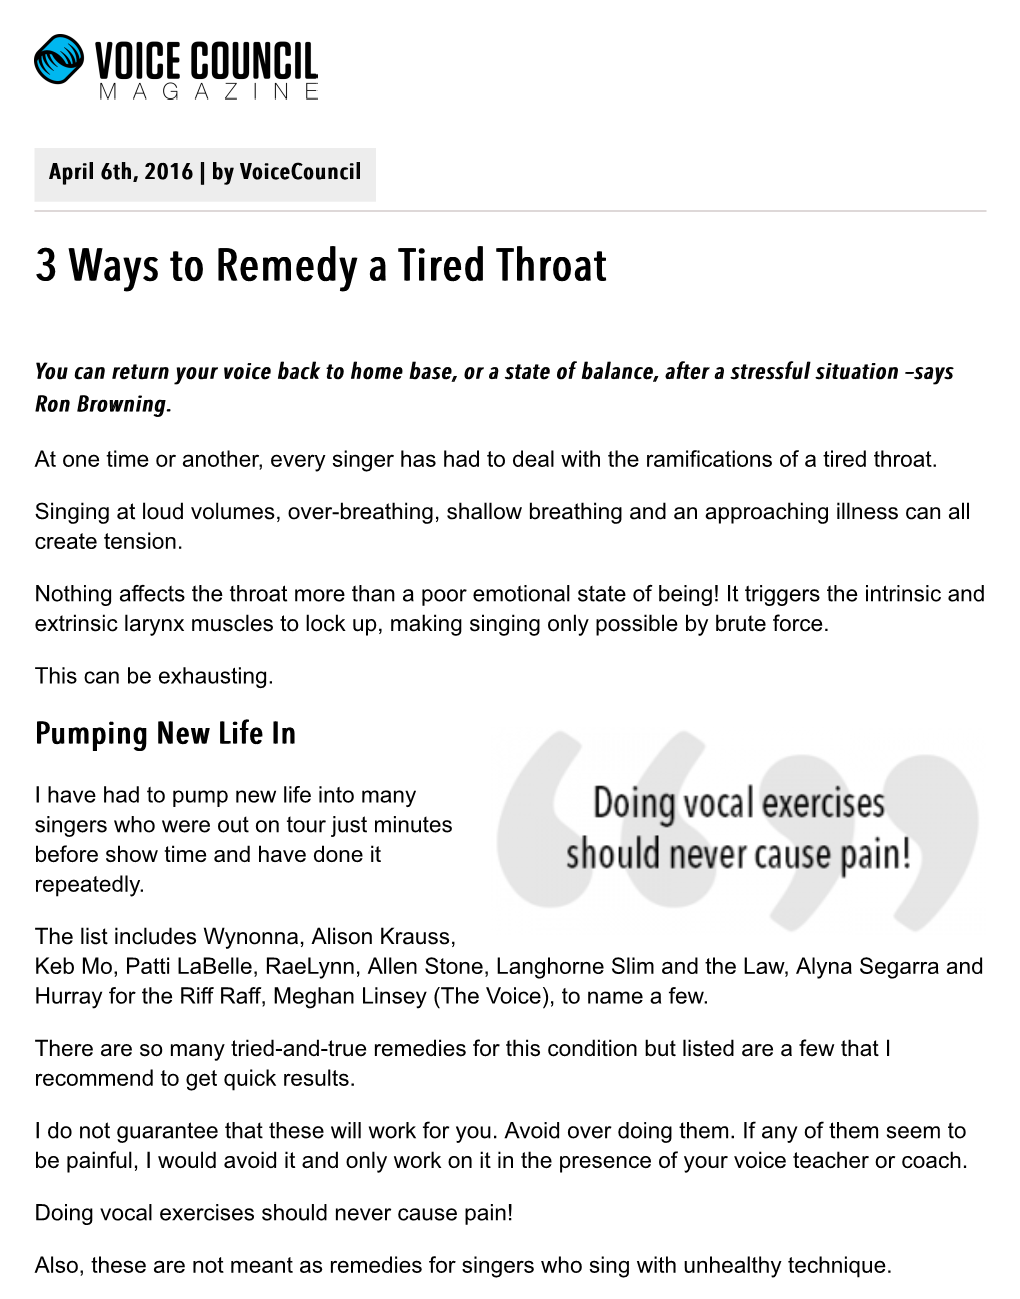 3 Ways to Remedy a Tired Throat